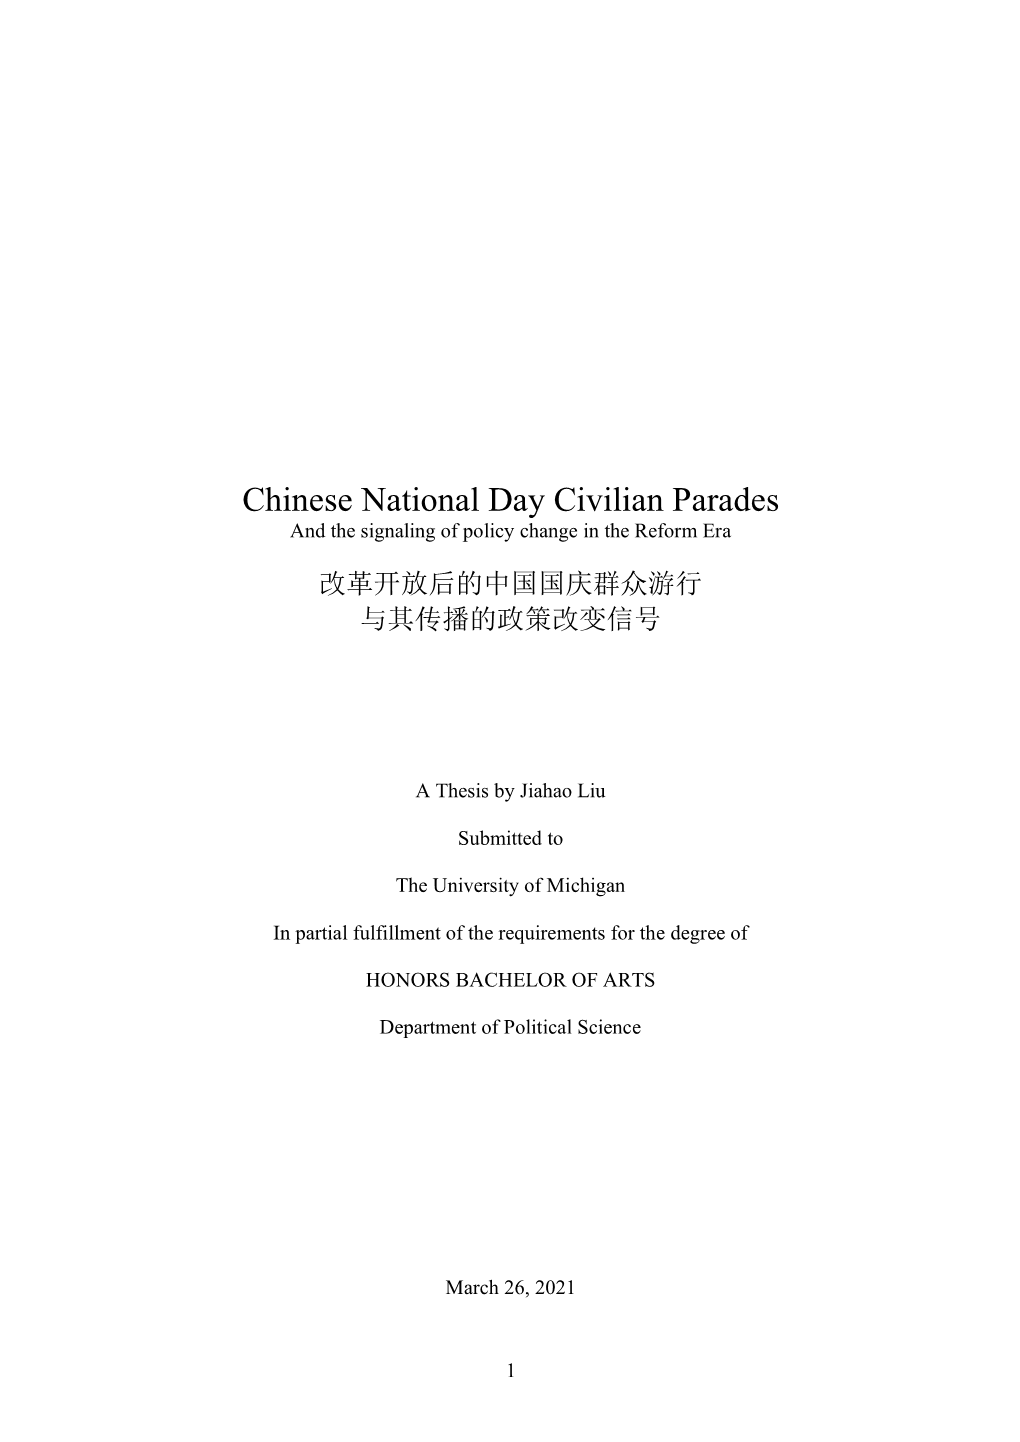 Chinese National Day Civilian Parades and the Signaling of Policy Change in the Reform Era